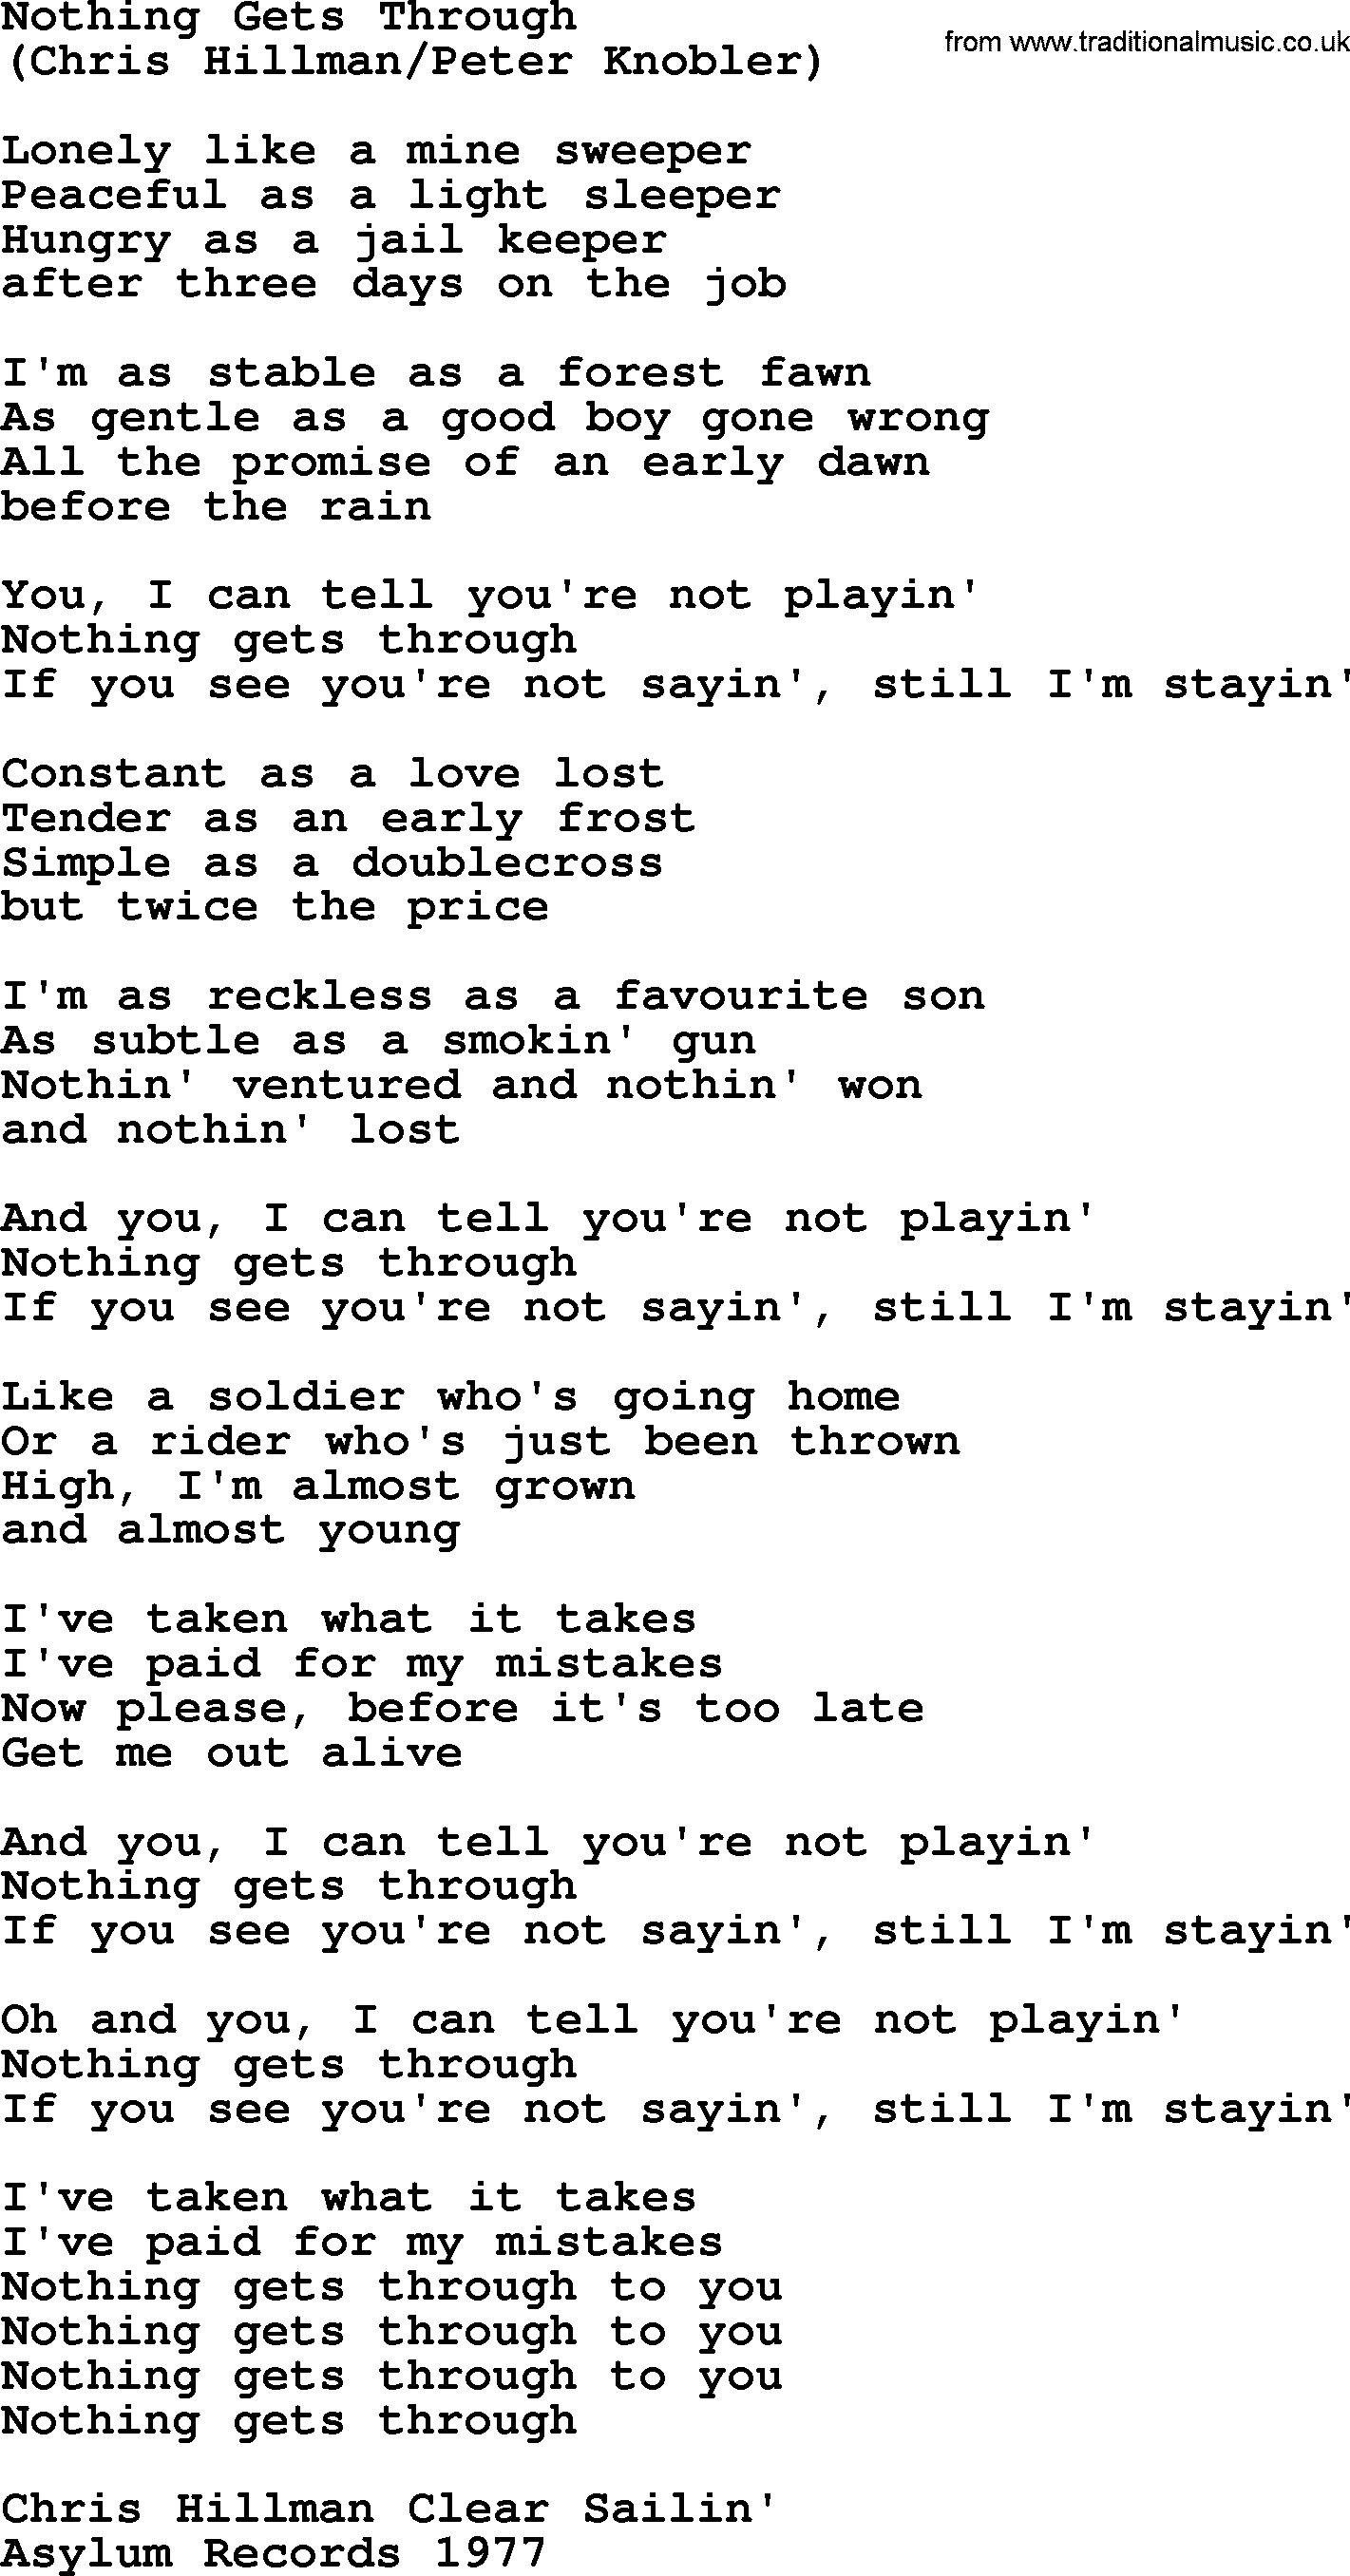 The Byrds song Nothing Gets Through, lyrics